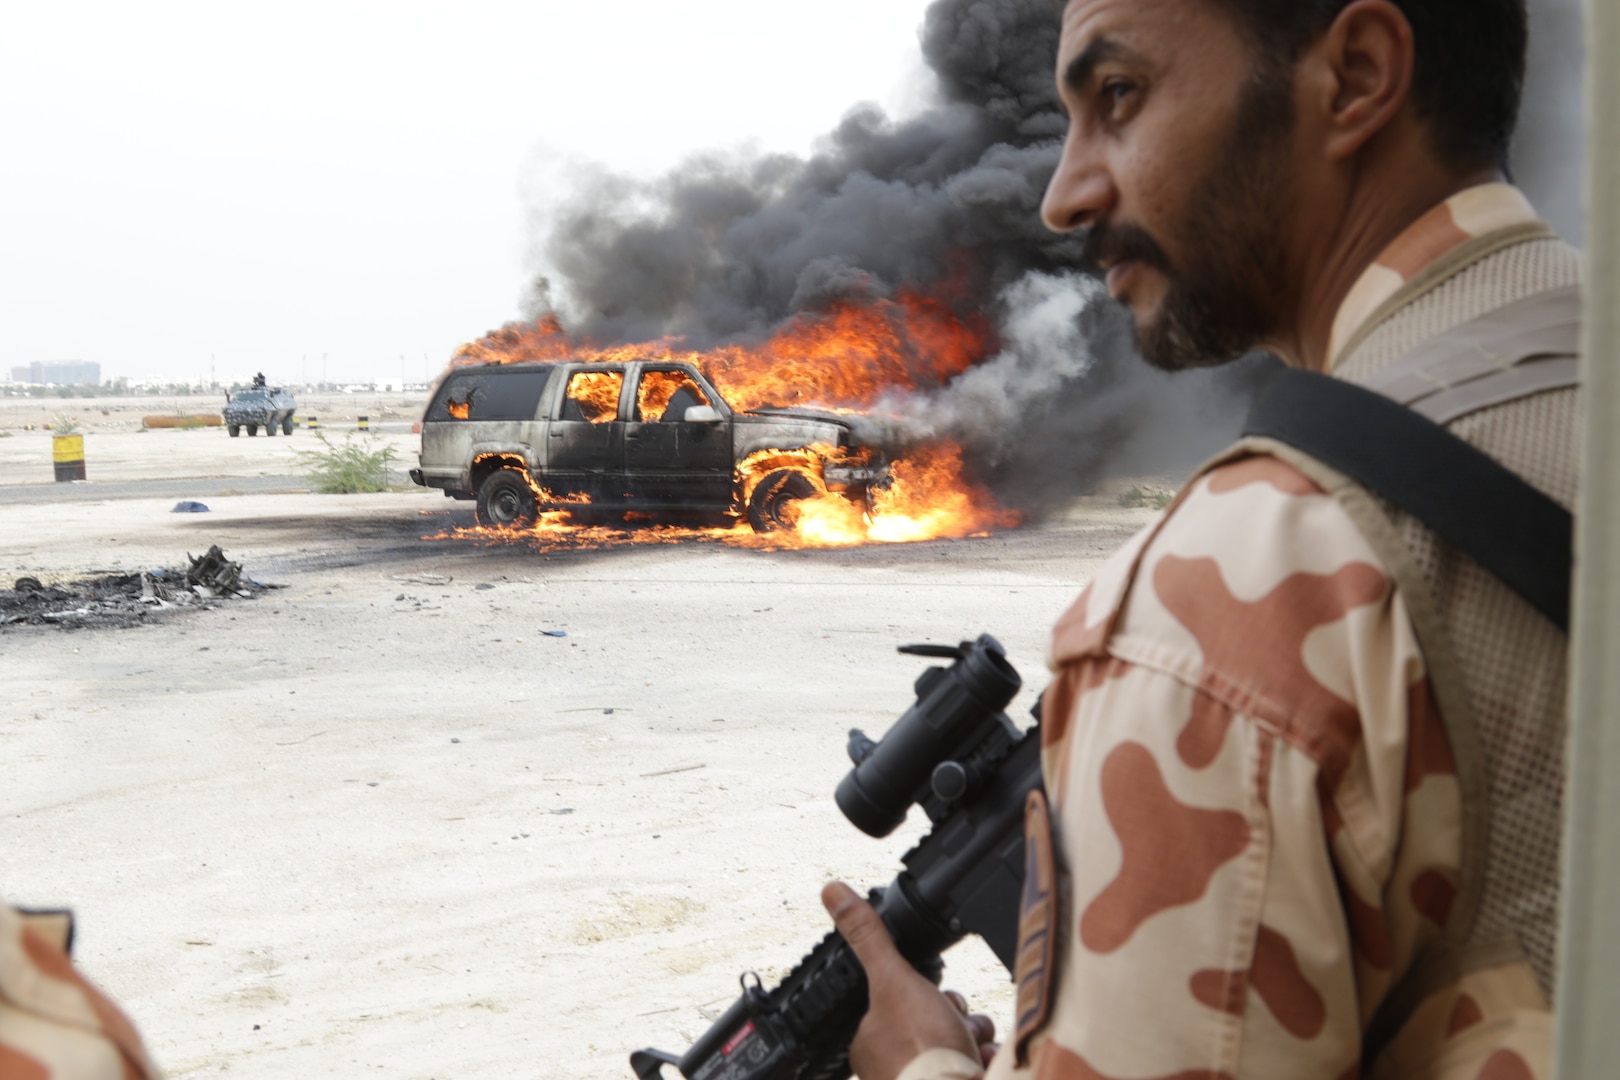 Civilian and military personnel from Kuwait, Qatar, Saudi Arabia and the U.S. conduct counterterrorism drills, search and rescue operations and responded to a mock vehicle explosion as part of exercise Eagle Resolve 2017, March 28, 2017, in Kuwait. The training exercises participant’s ability to respond as a combined joint task force headquarters staff. Exercise Eagle Resolve is the premier U.S. multilateral exercise within the Arabian Peninsula. Since 1999, Eagle Resolve has become the leading engagement between the U.S. and Gulf Cooperation Council nations to collectively address the regional challenges associated with asymmetric warfare in a low-risk setting.